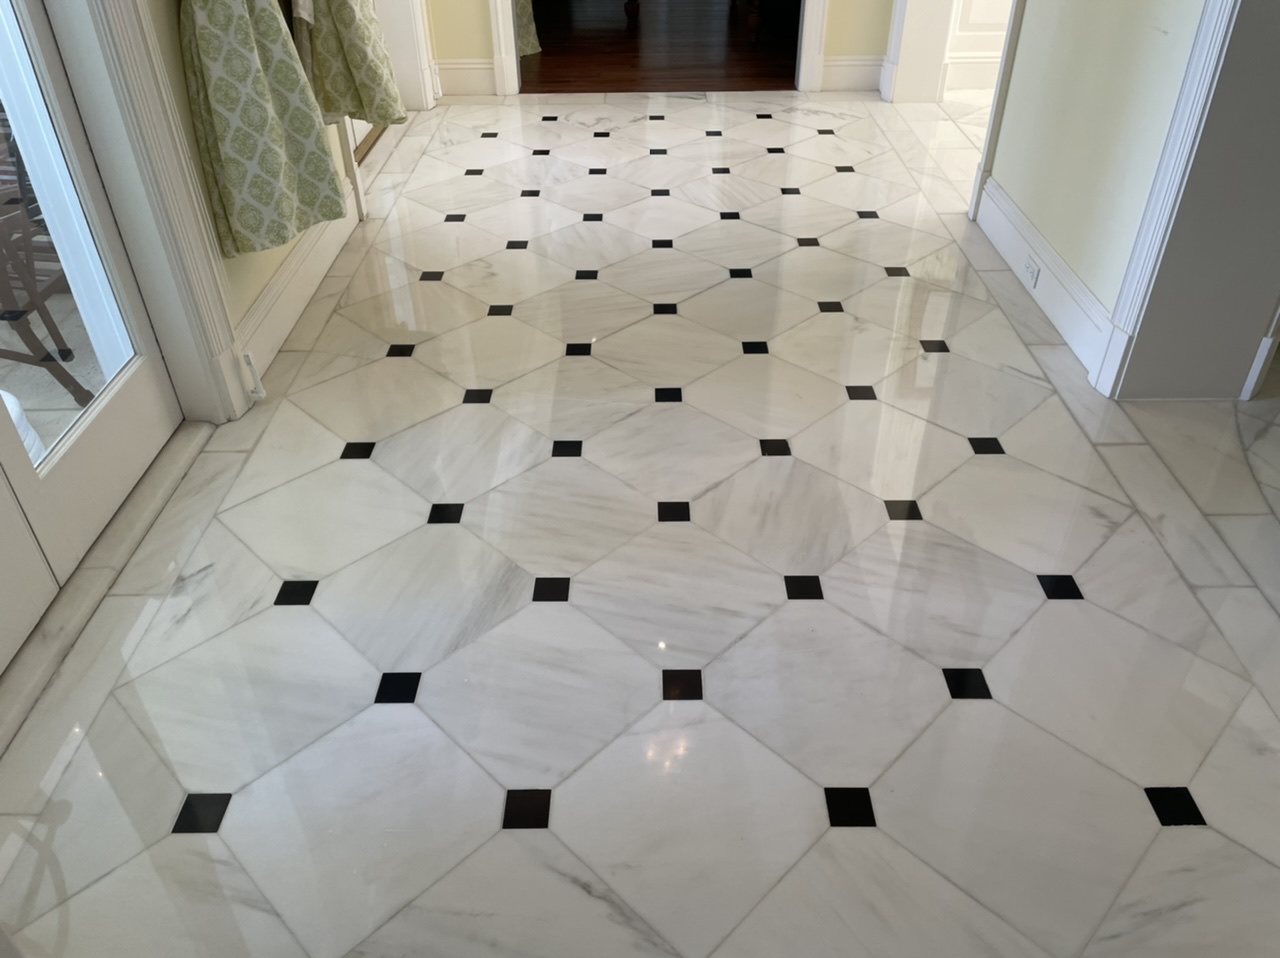 Lifestyle Marble Restoration| Floor polishing services and Tile cleaning